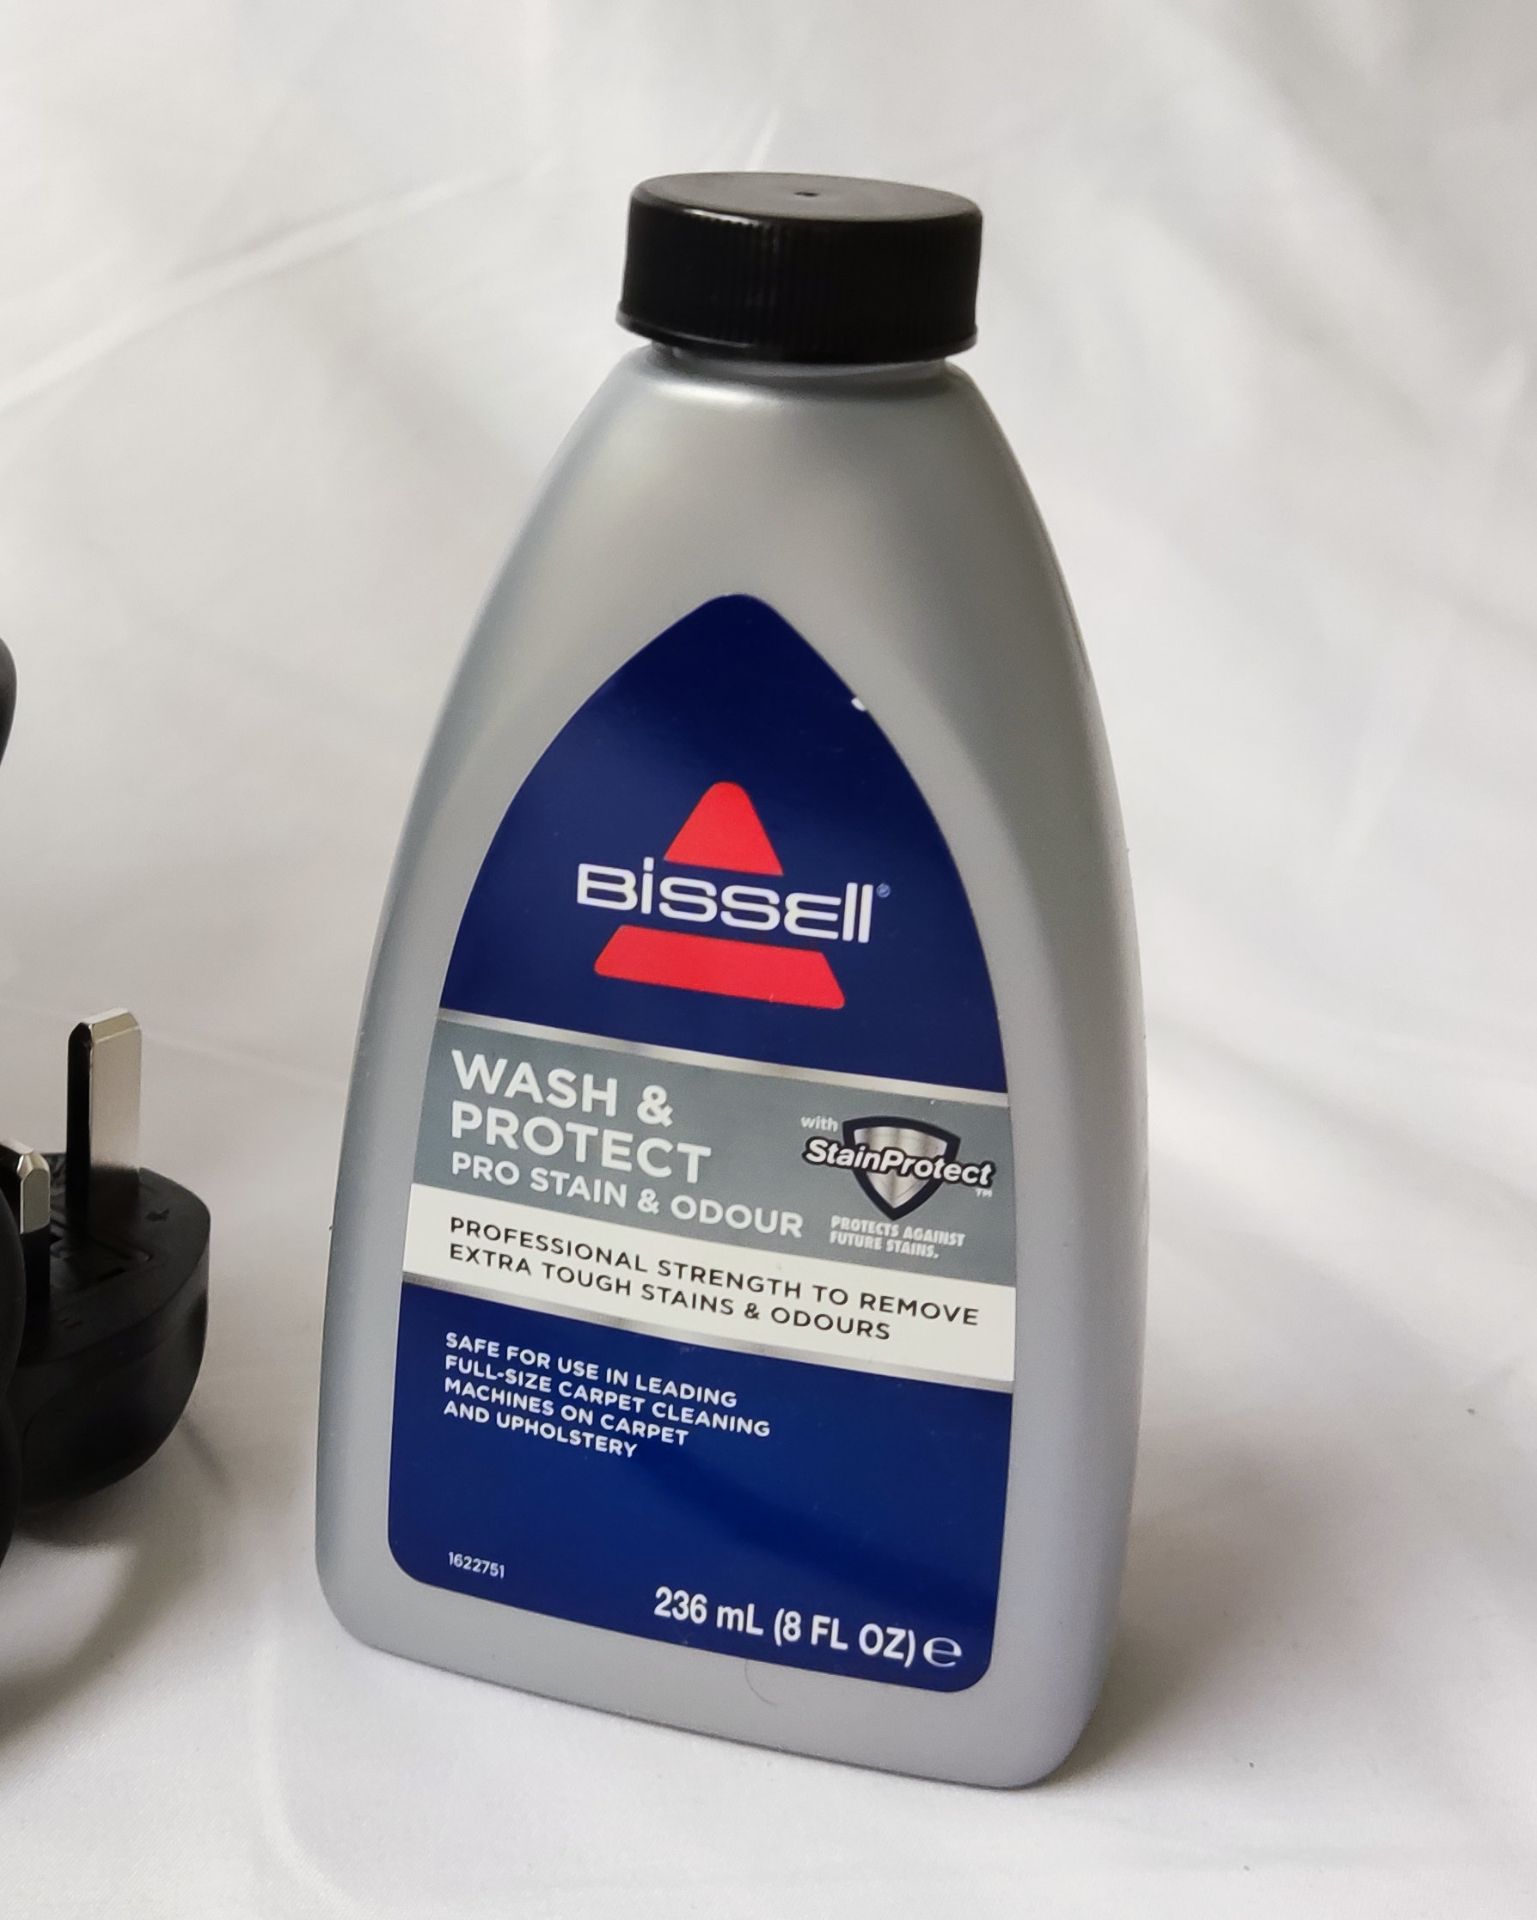 1 x BISSELL Spotclean Pro Portable Carpet & Upholstery Washer - New/Boxed - RRP £179.99 - Ref: - Image 11 of 15